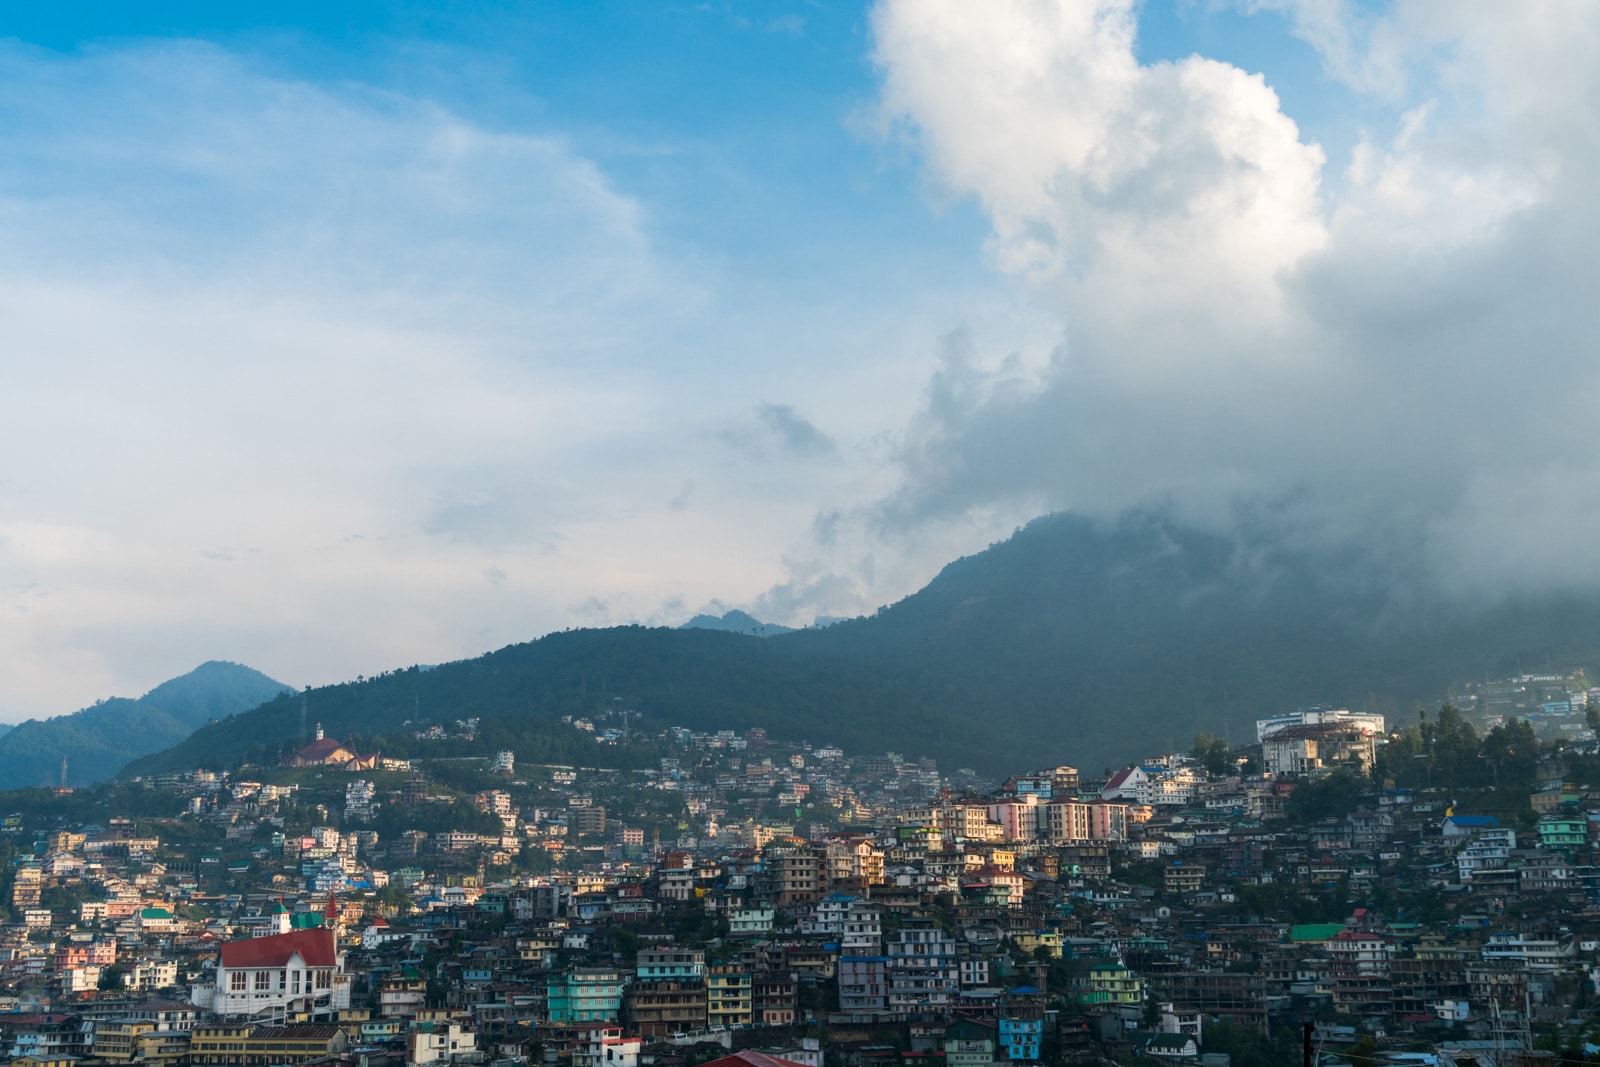 A view of Kohima from the balcony of Morung Lodge homestay